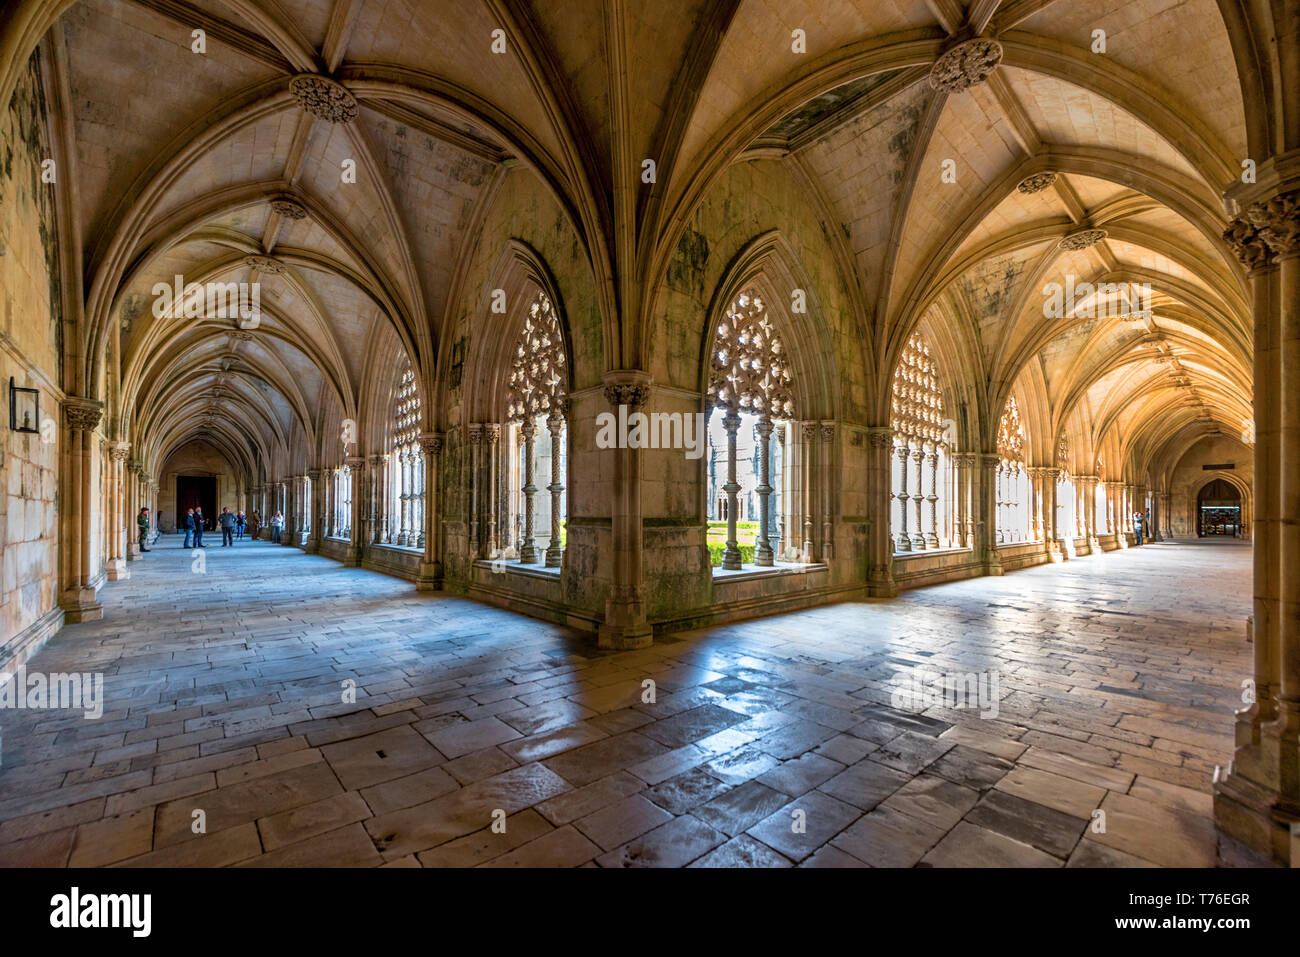 Impressive atmosphere of Batalha Dominican convent, Portugal Stock Photo